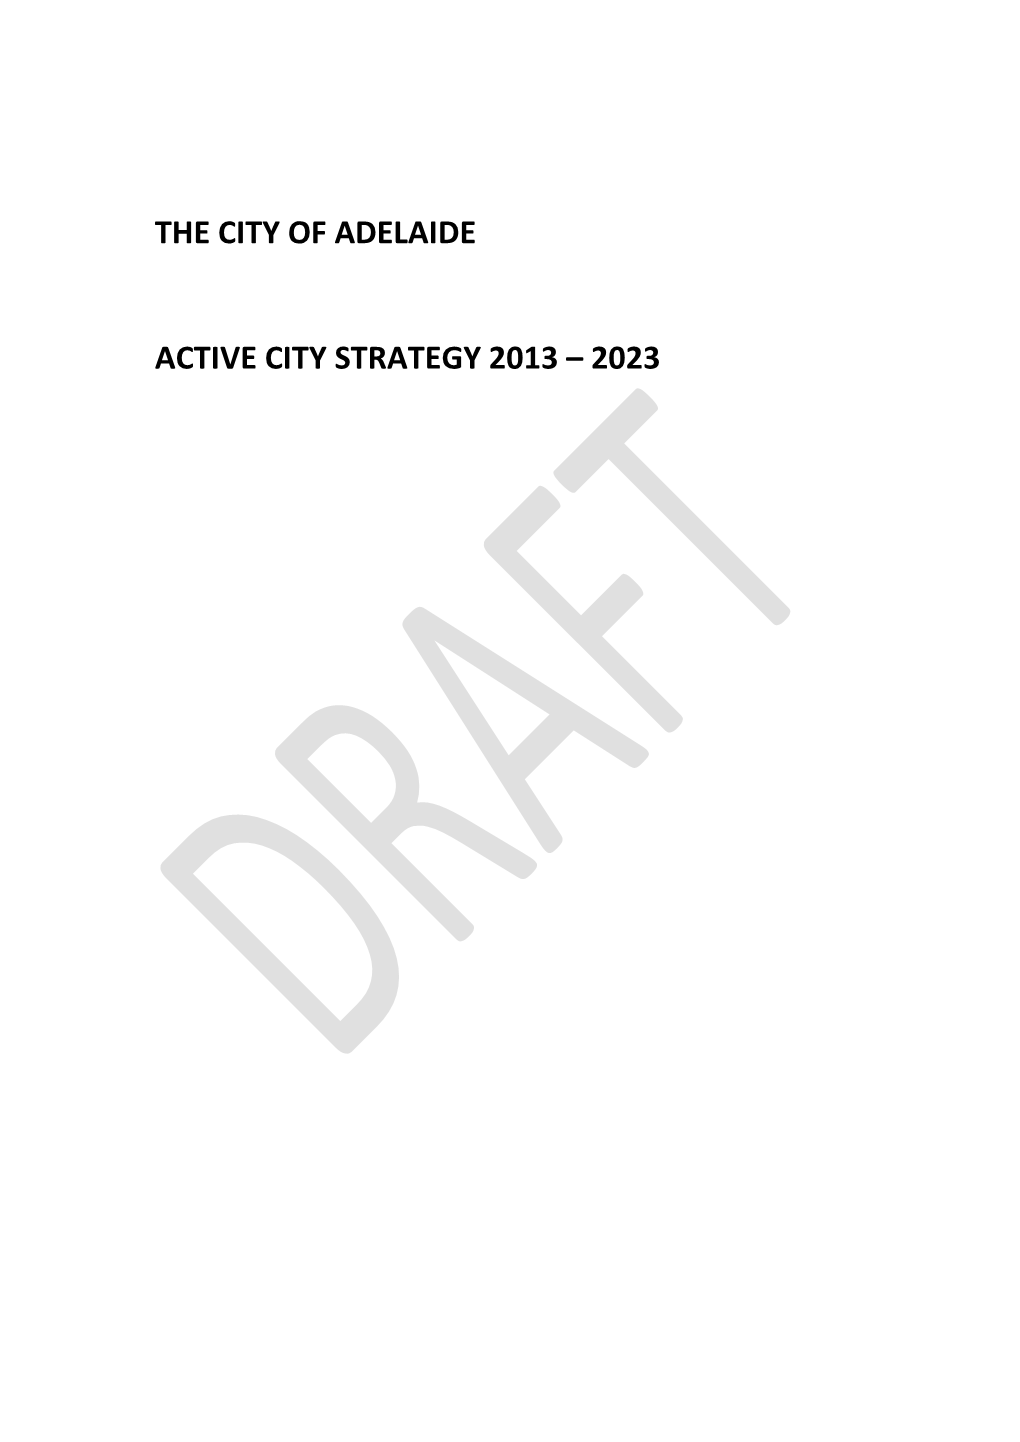 The City of Adelaide Active City Strategy 2013 – 2023